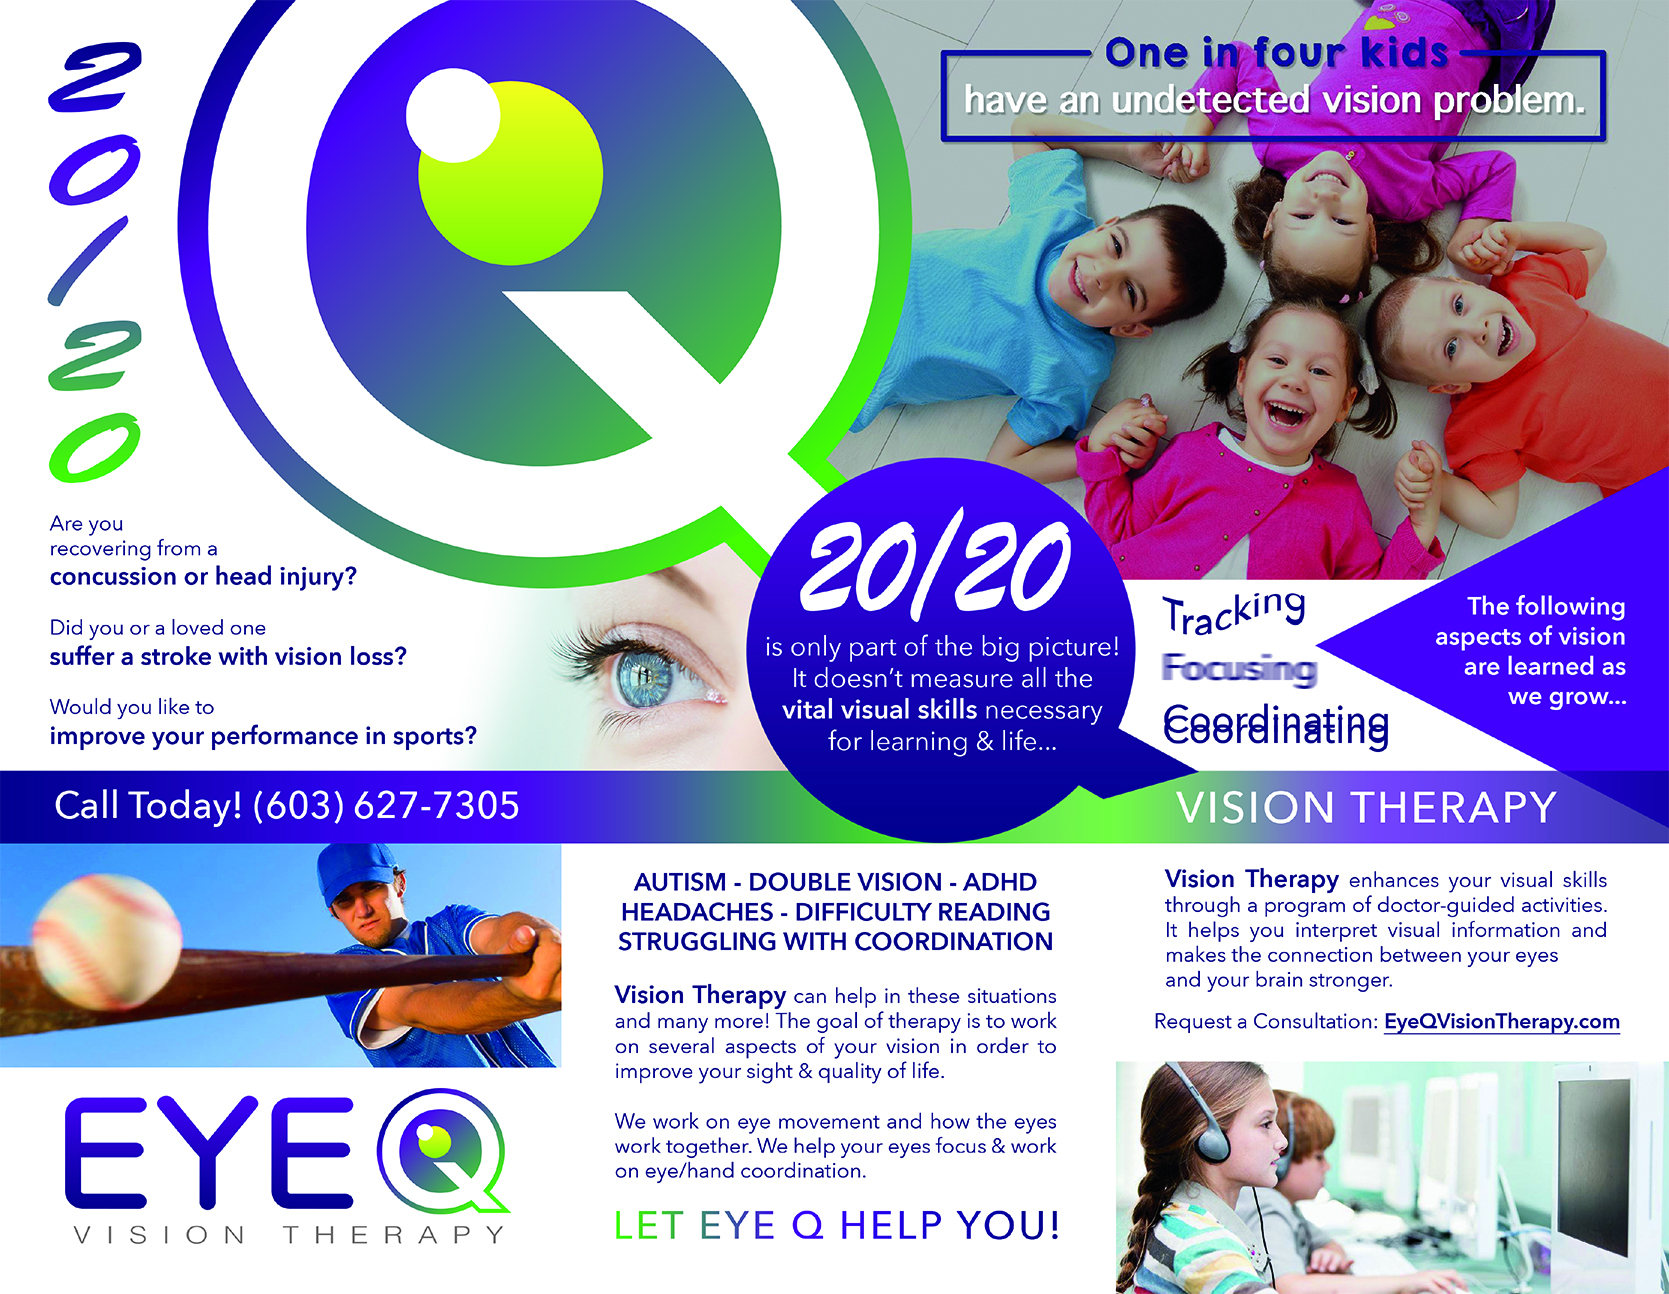 Brochure Design - Eye Q Vision Therapy